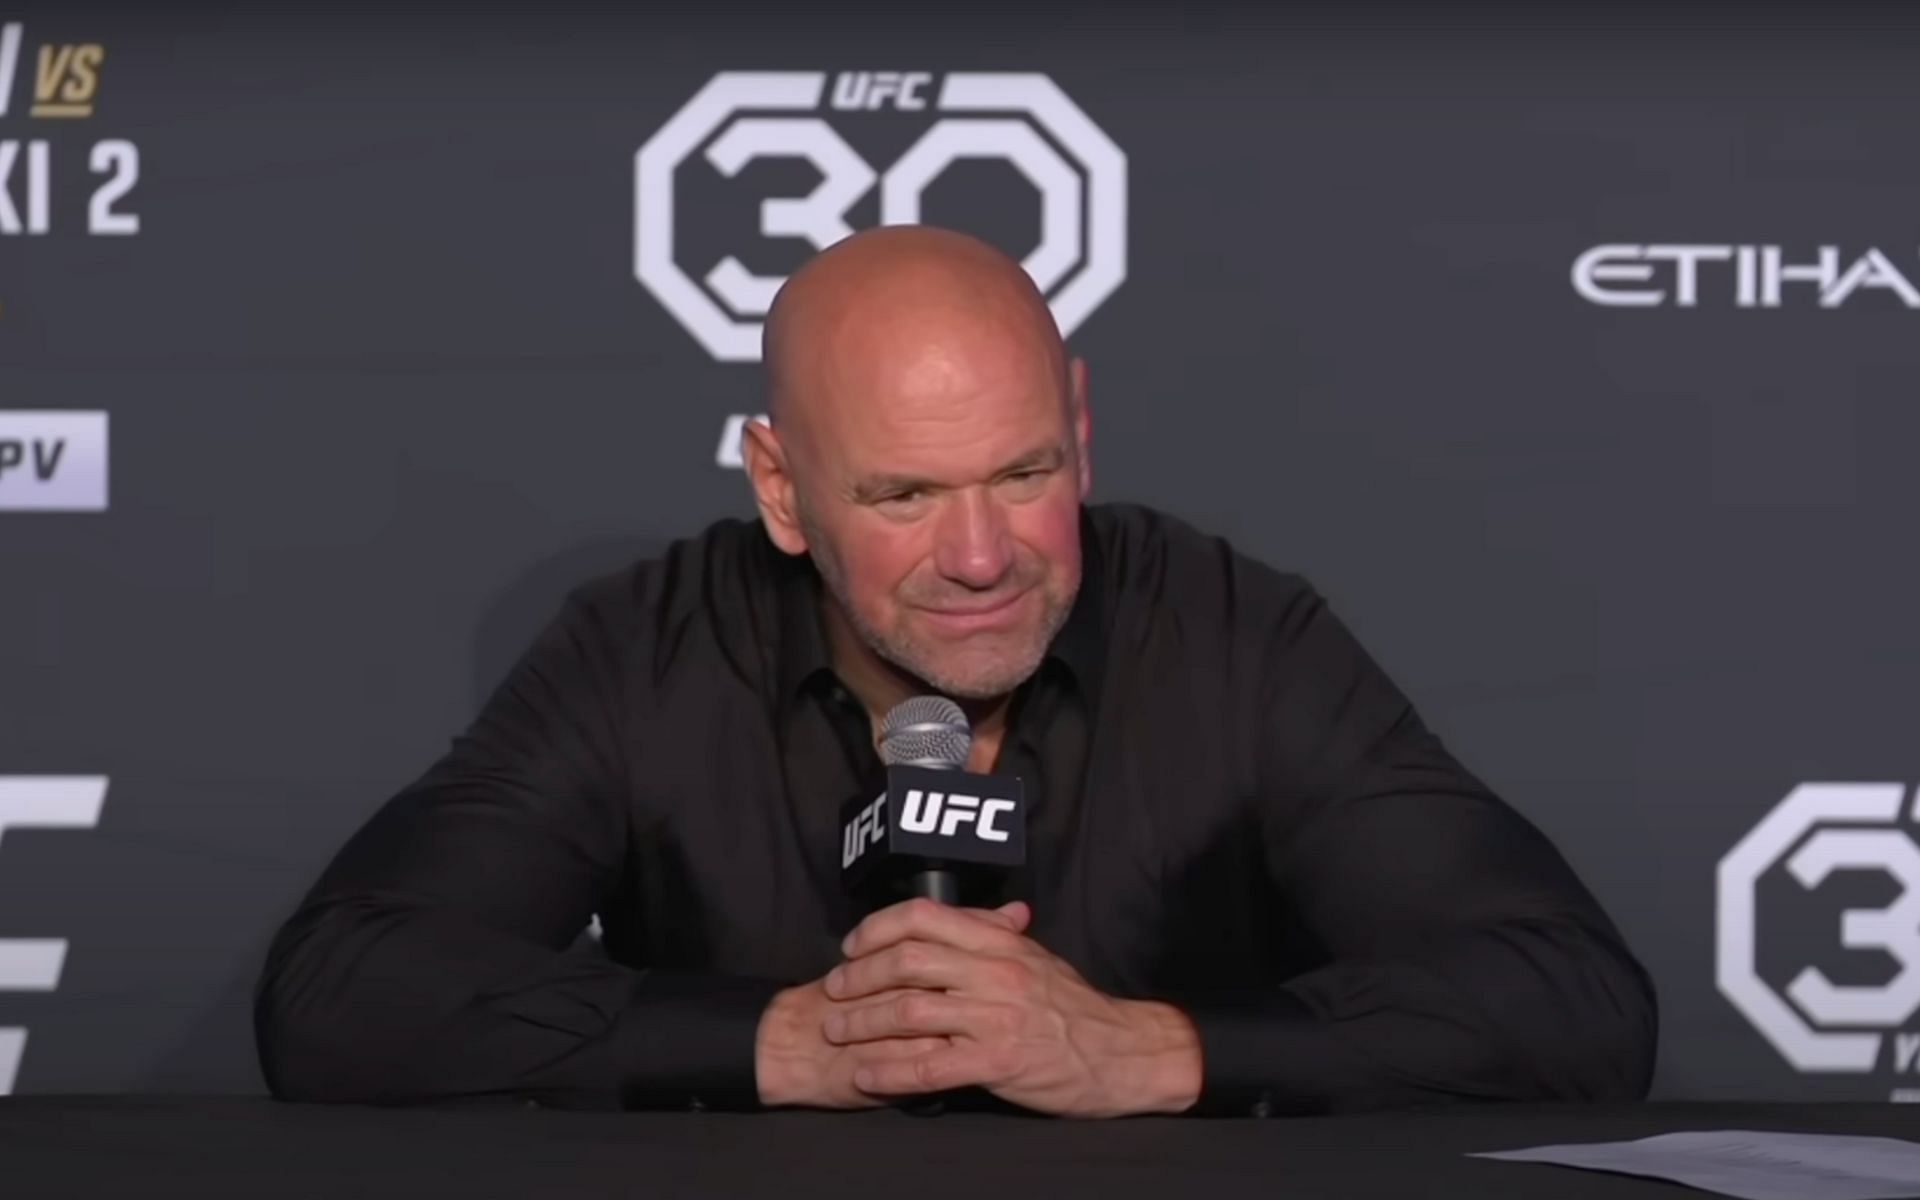 Dana White (Image Courtesy - UFC Official YouTube channel)